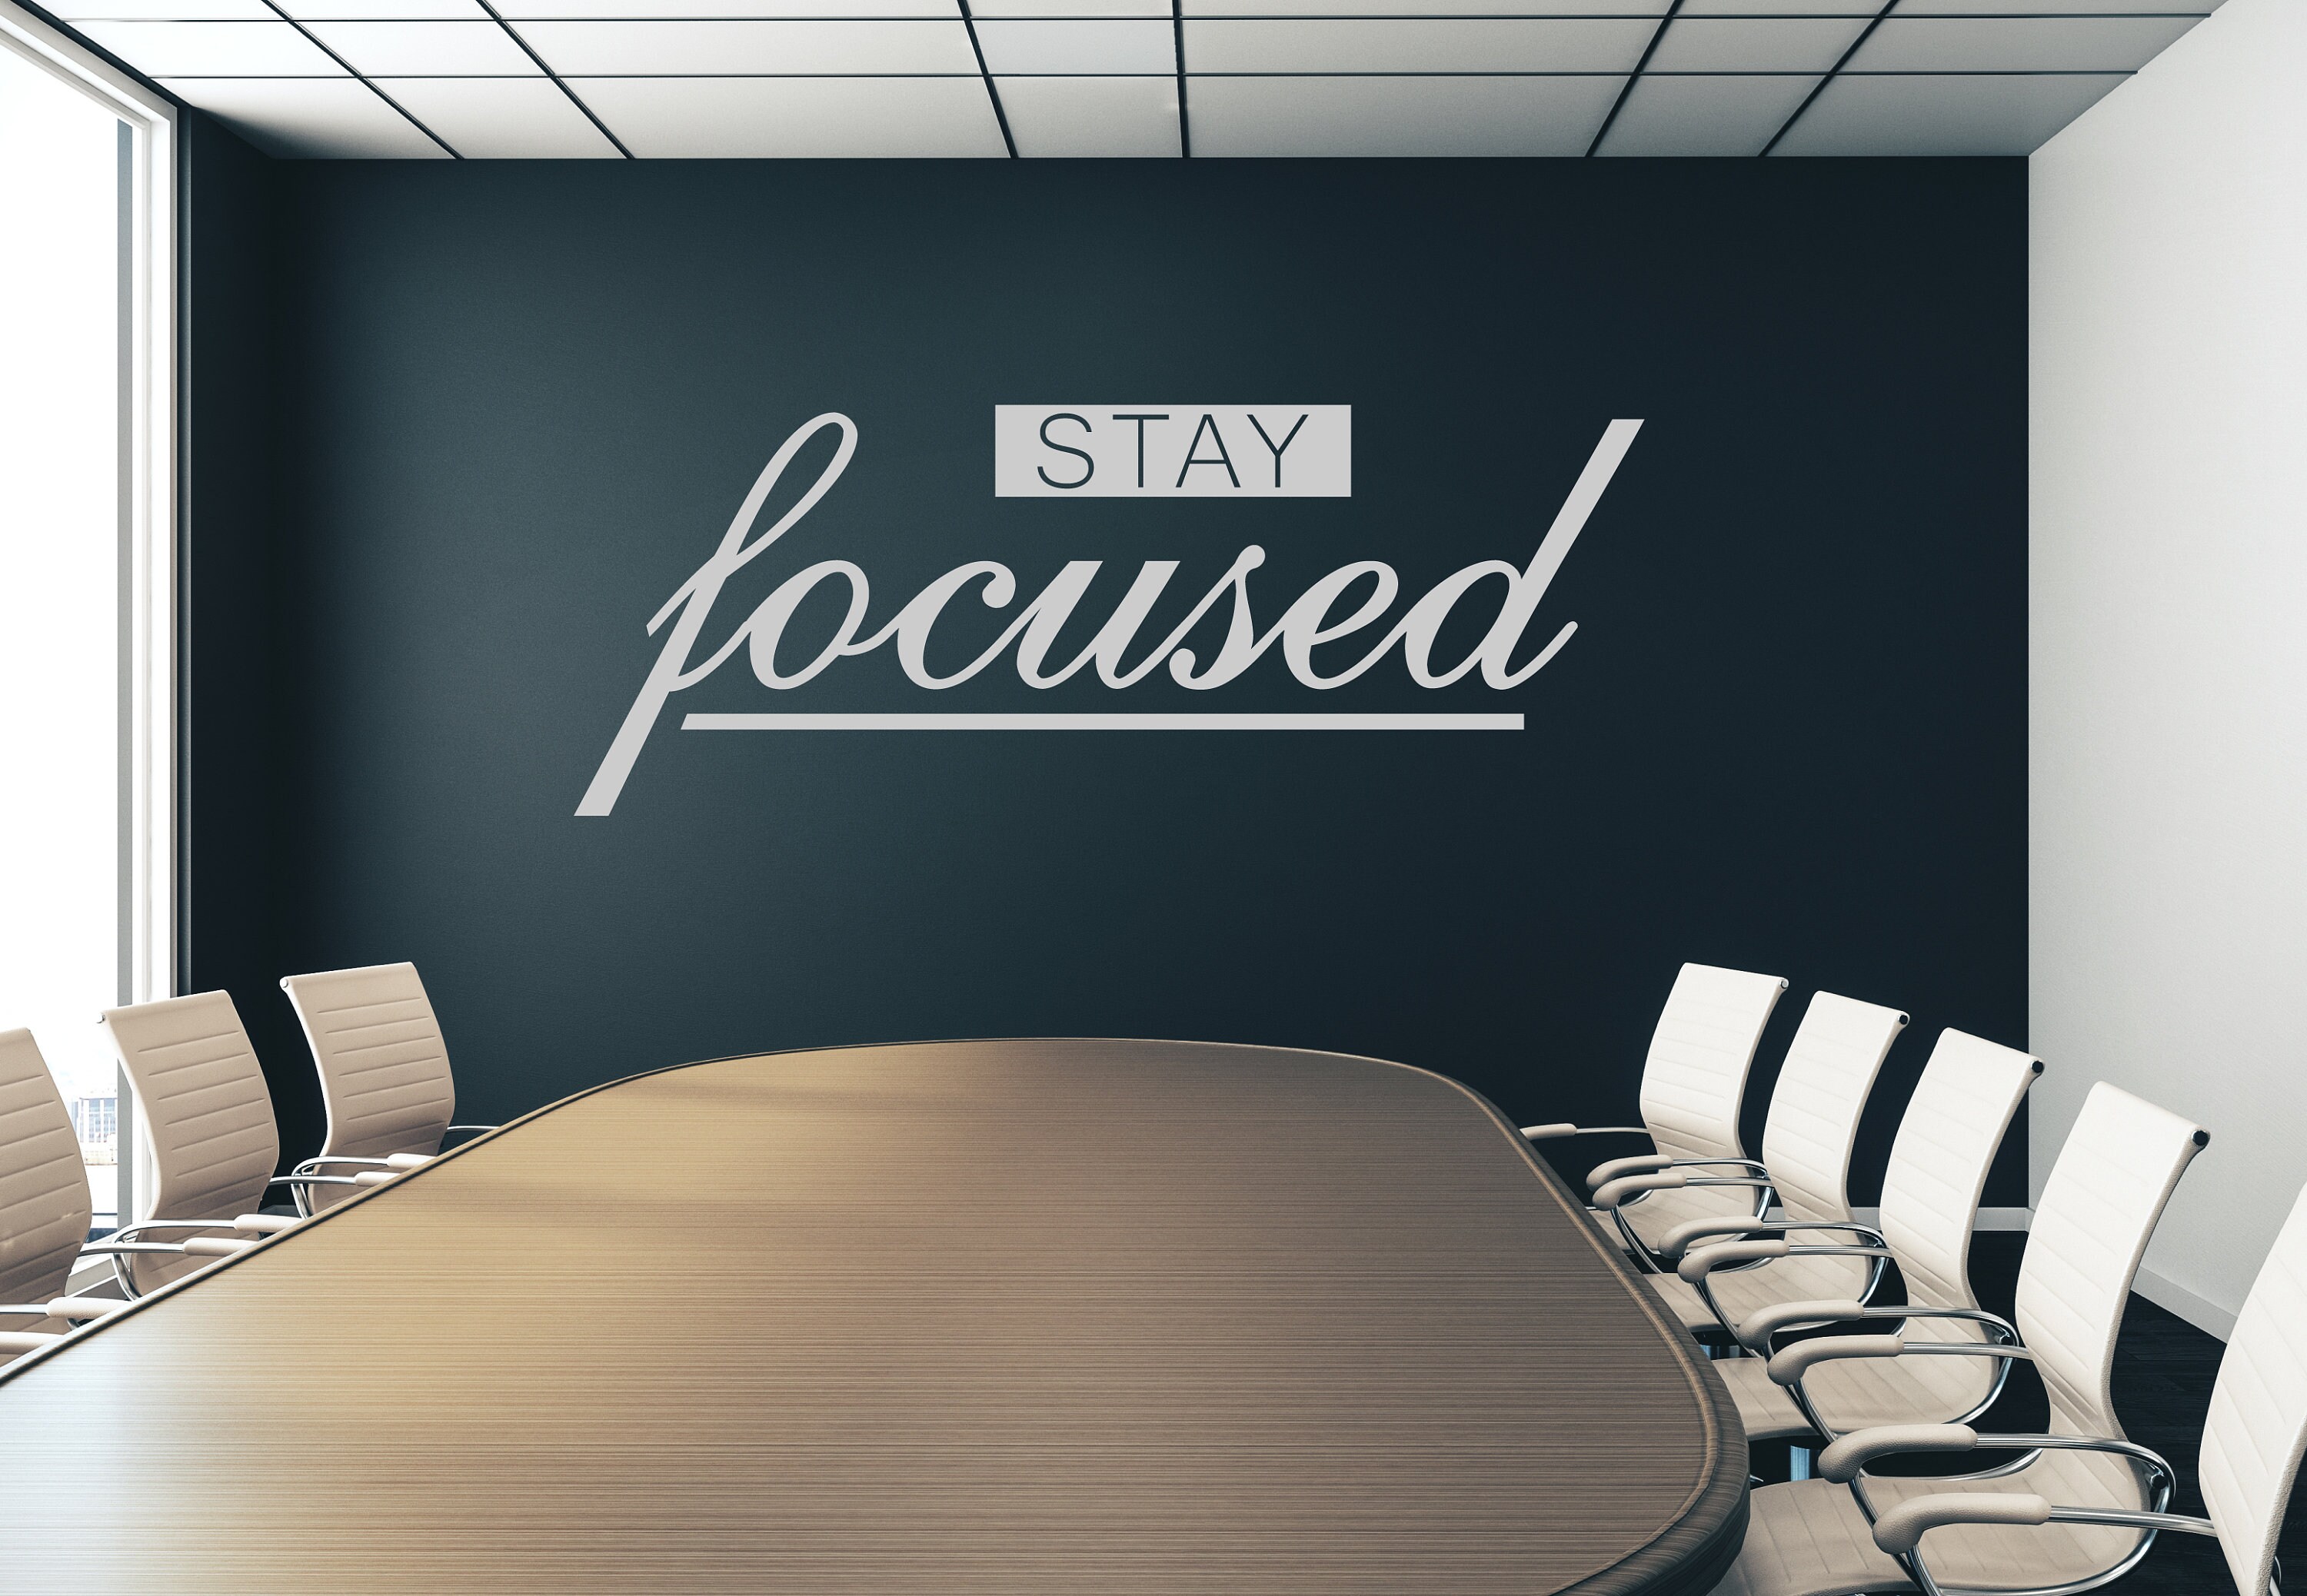 Stay focused wall lettering sticker wording Home office | Etsy